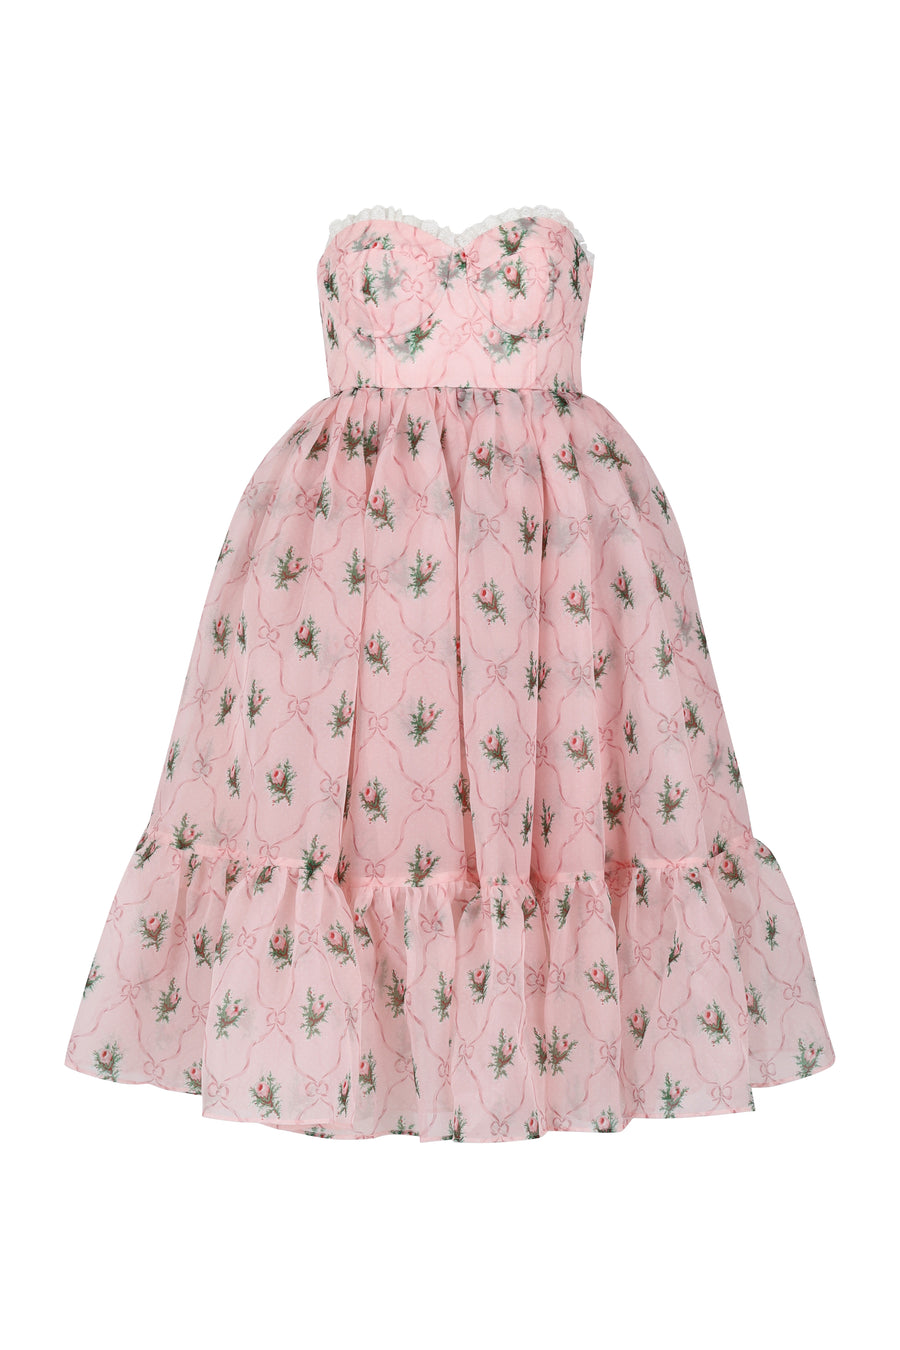 SELKIE The Carol French Corset Puff Dress in Pink